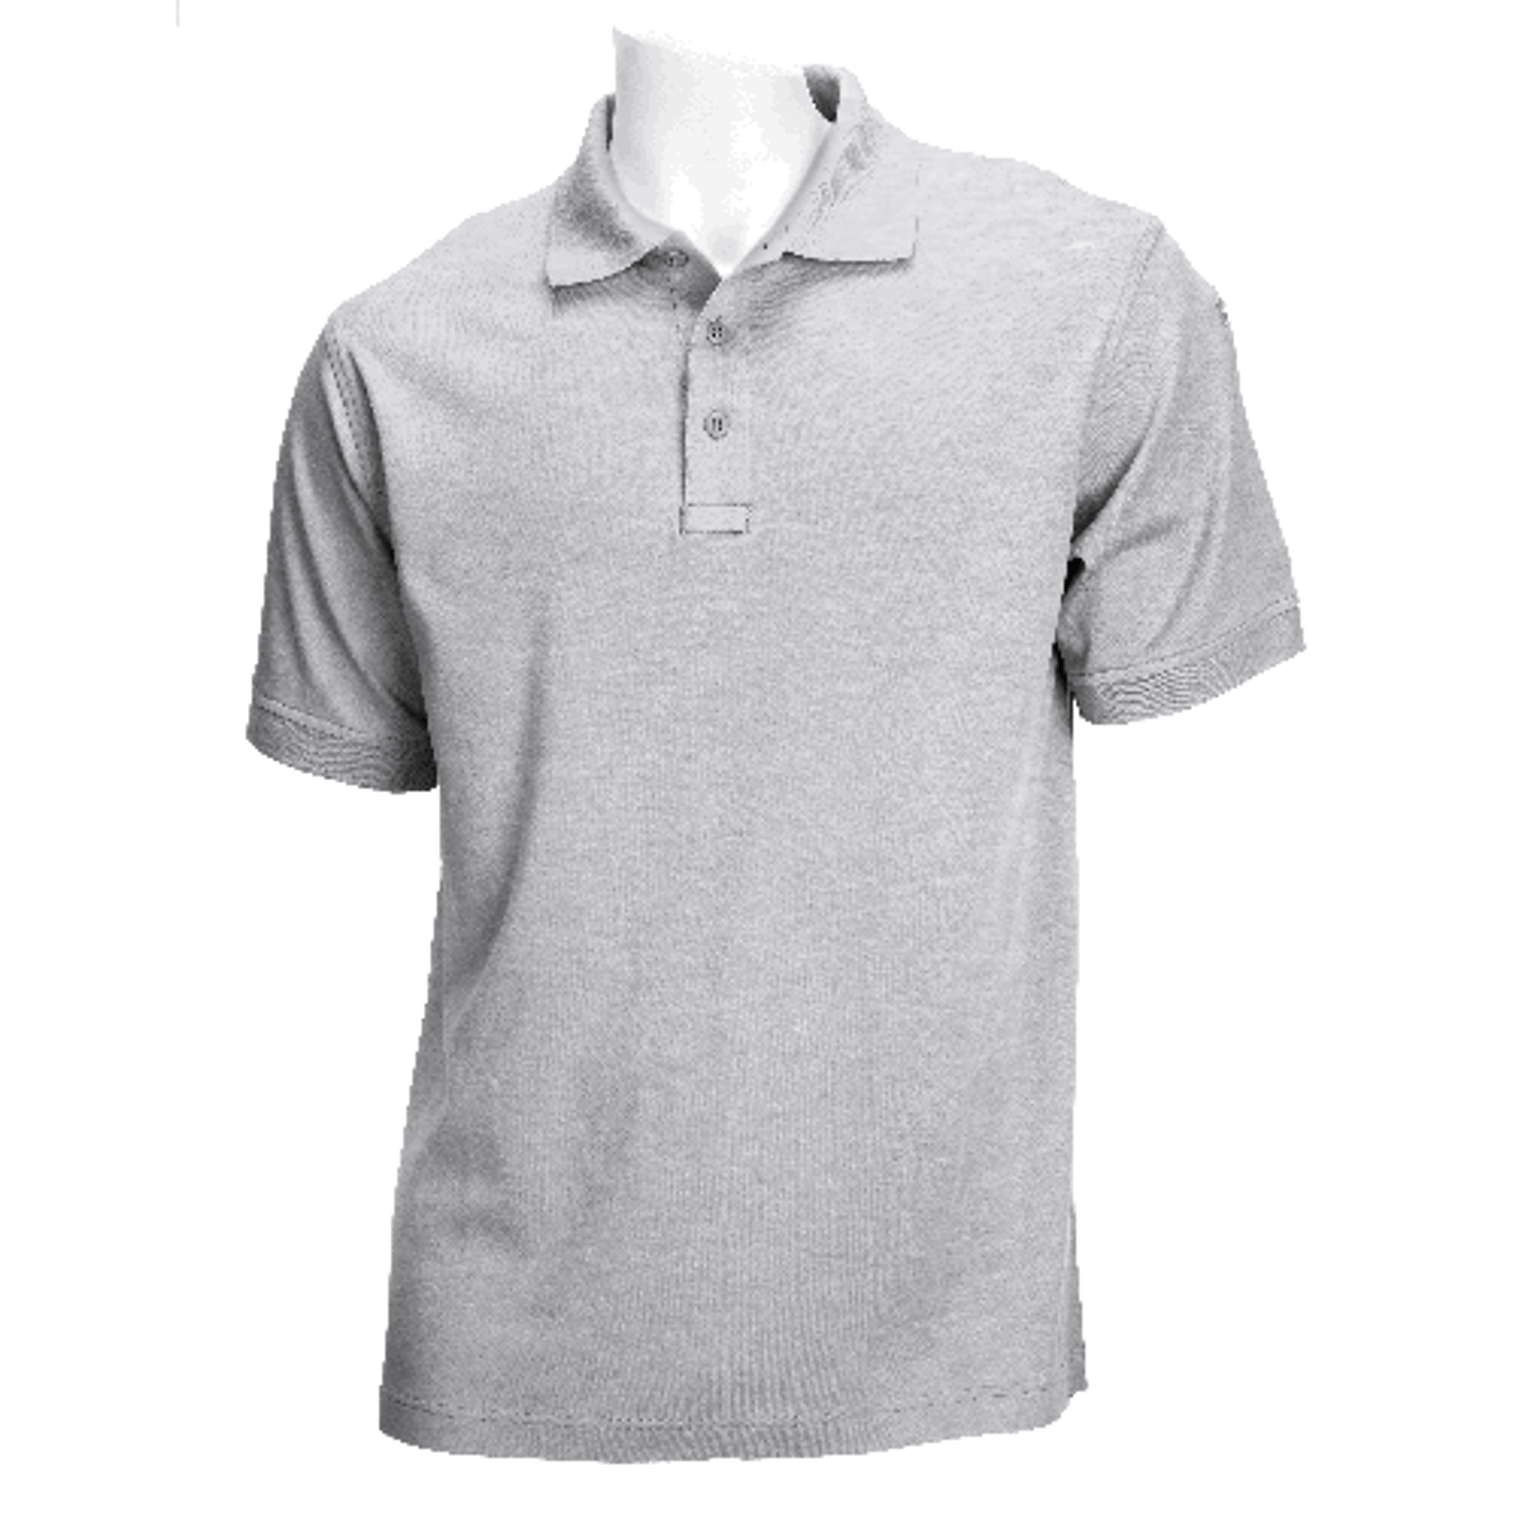 Tactical Polo - KR5-71182016L